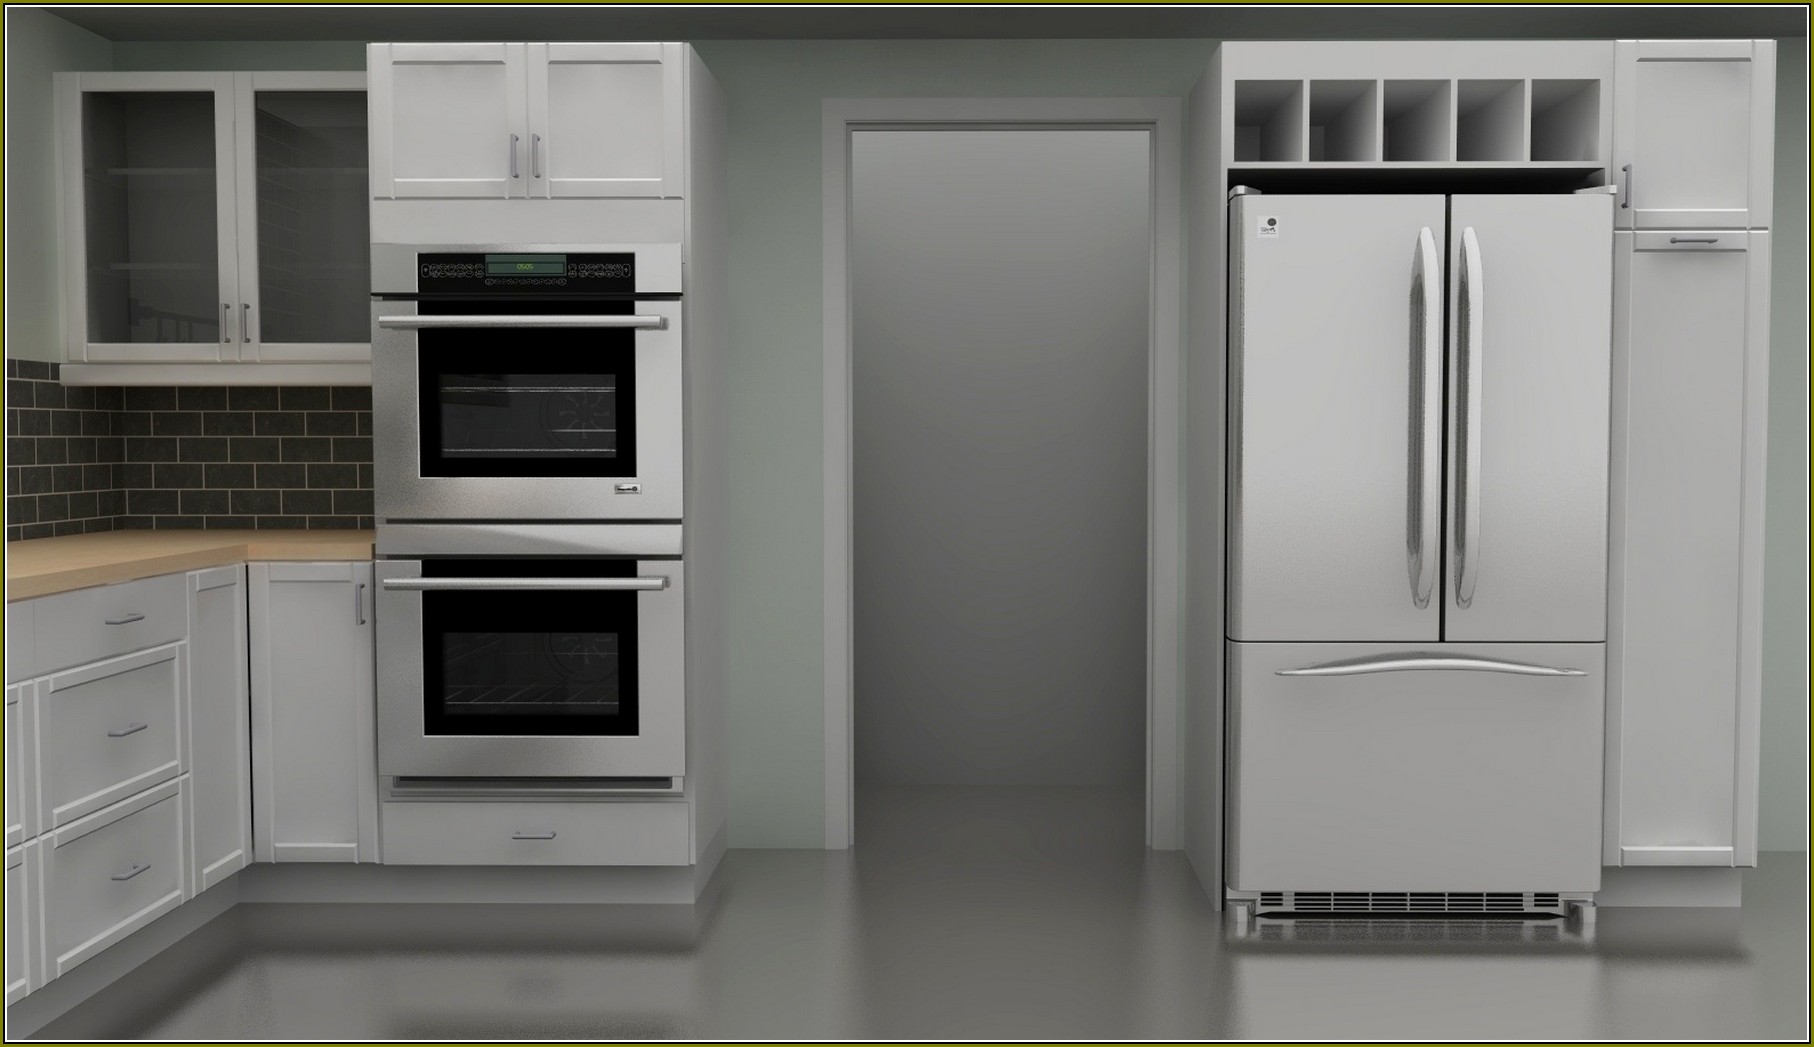 Double Oven Cabinet Plans